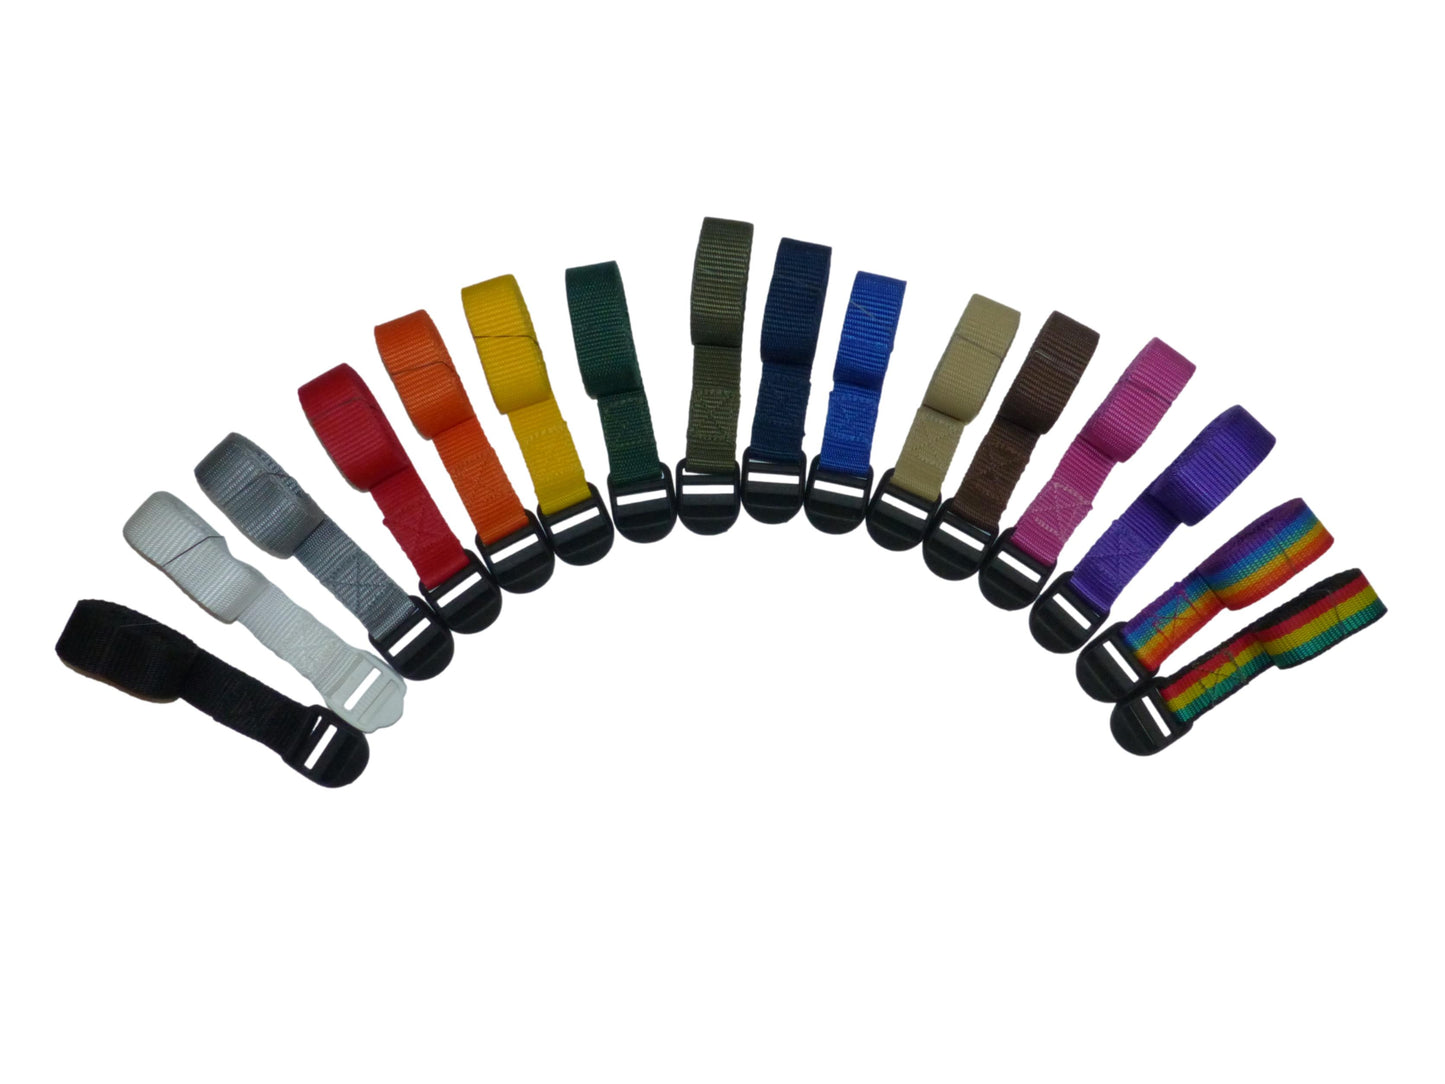 Benristraps 25mm Webbing Strap with Ladderloc Buckle (Pair) in many colours